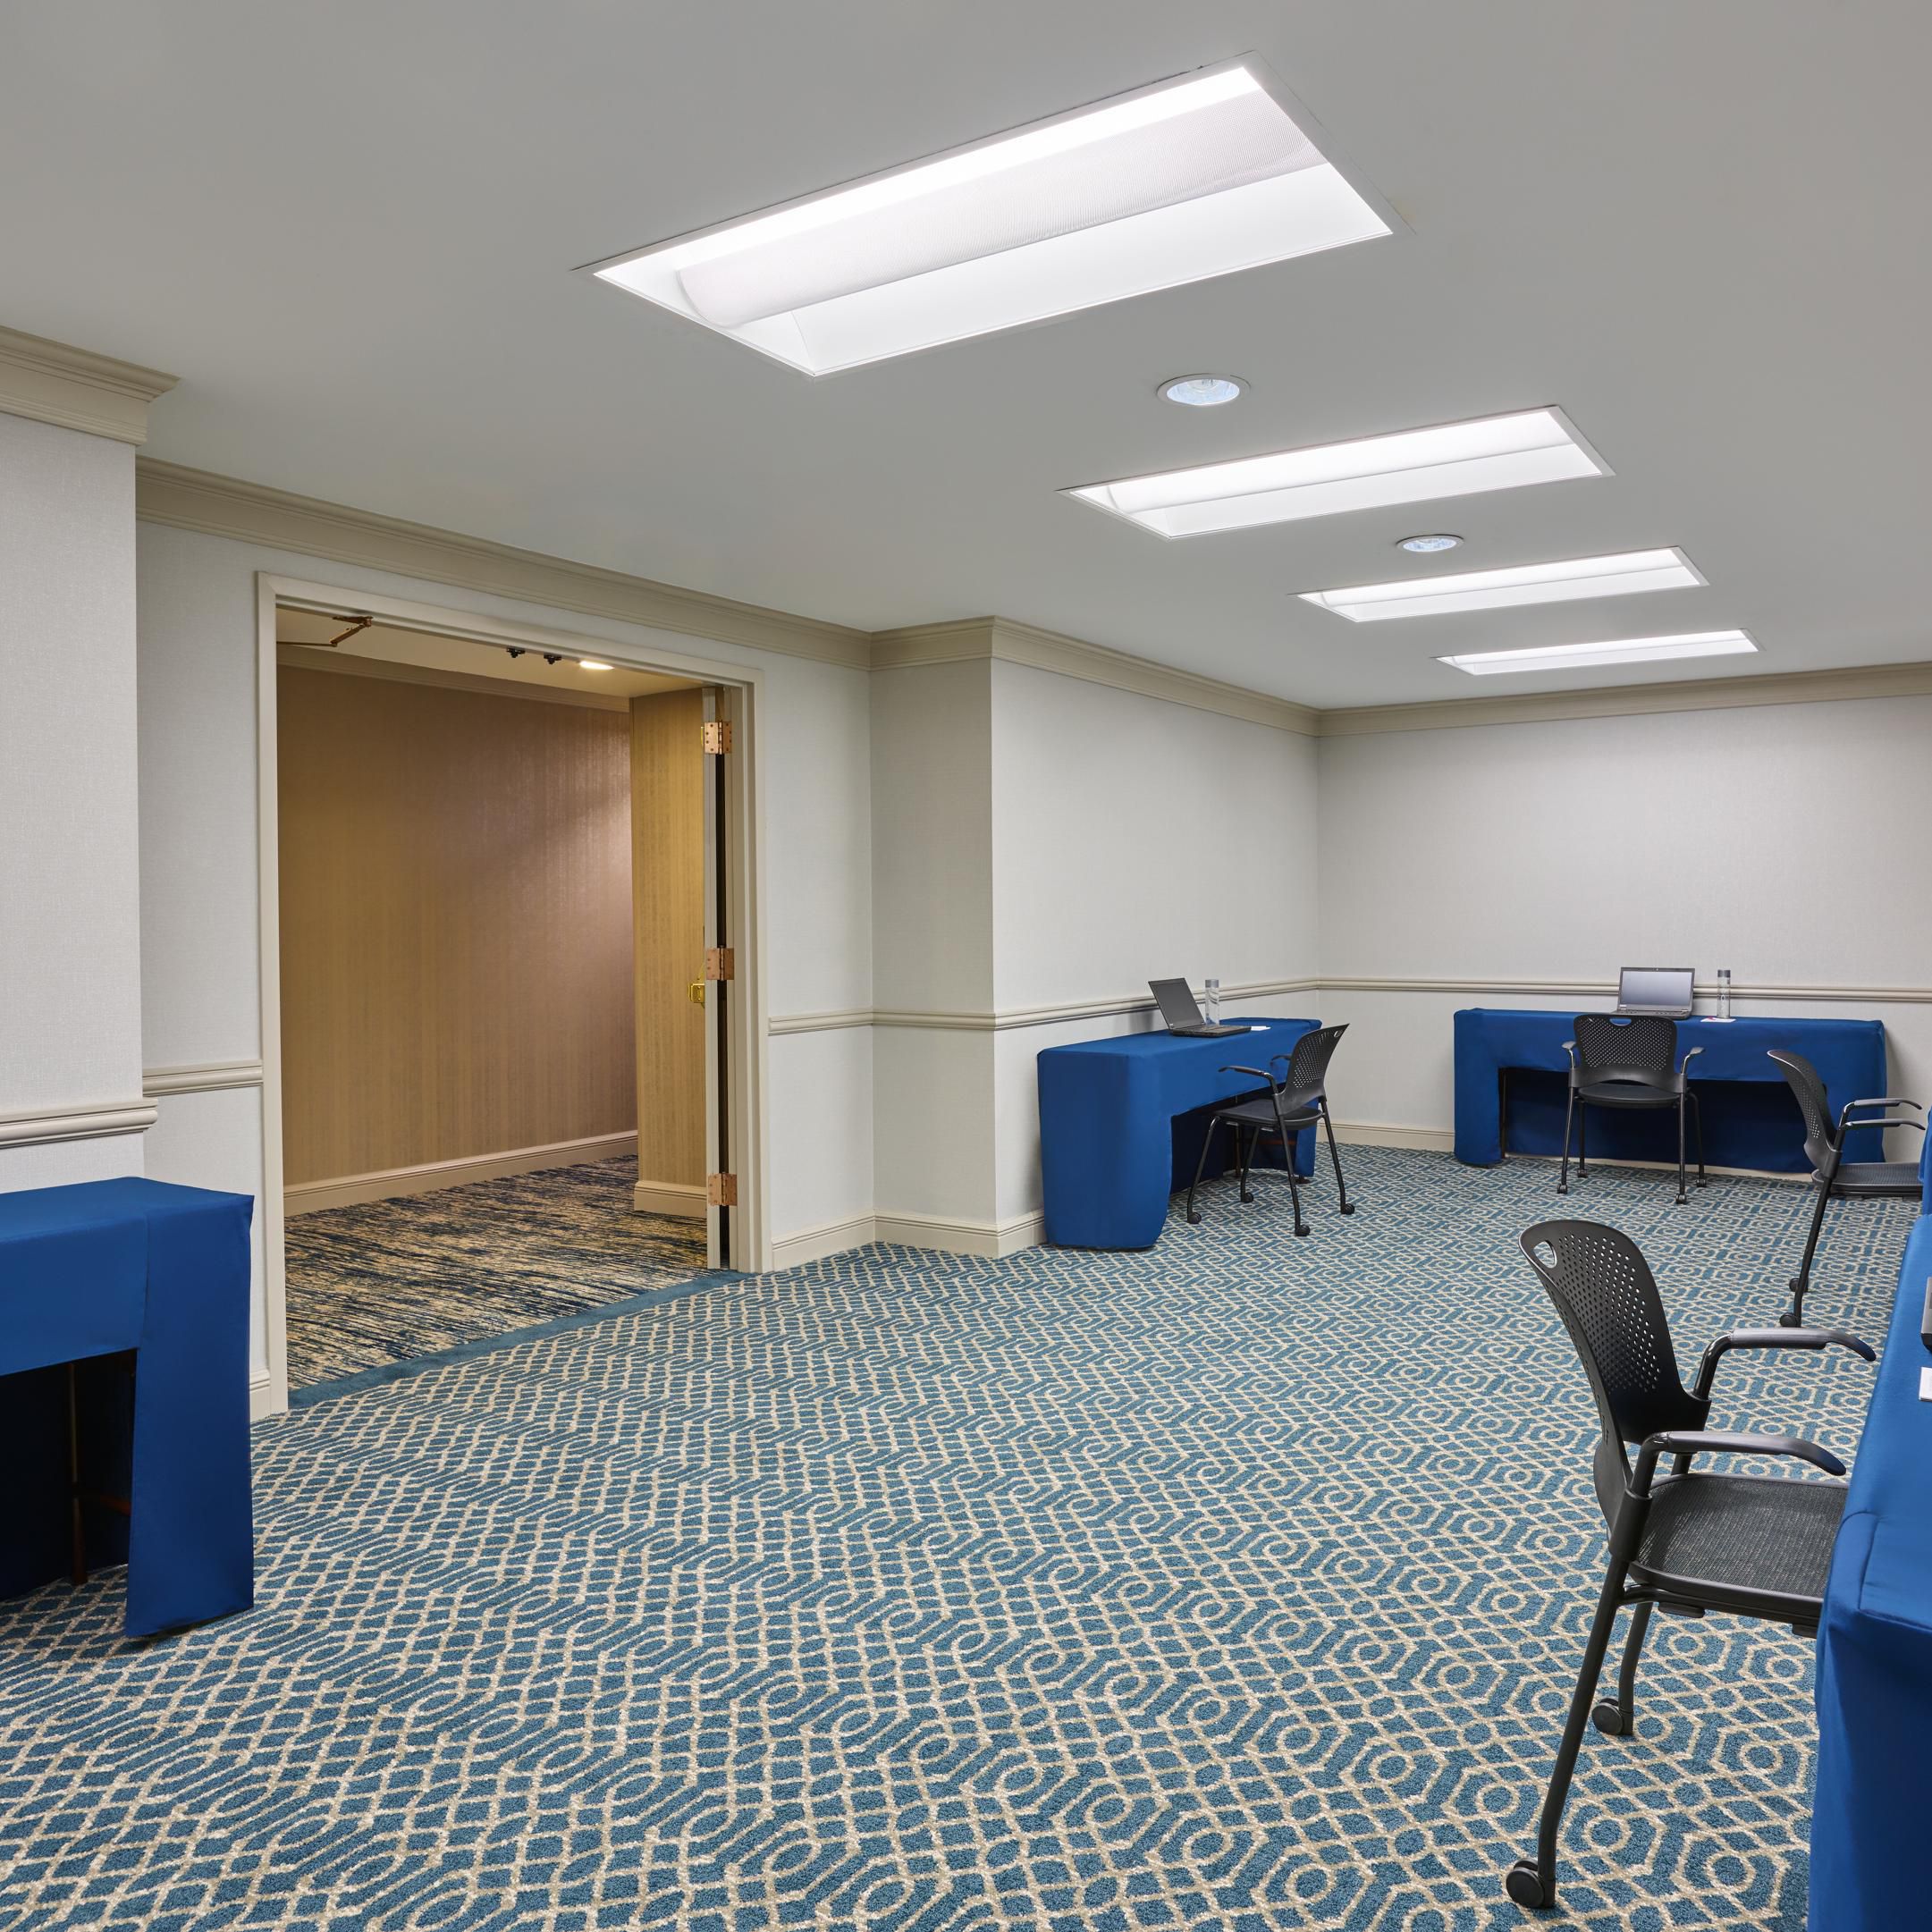 Chartres is an ideal office solution for your attendees.